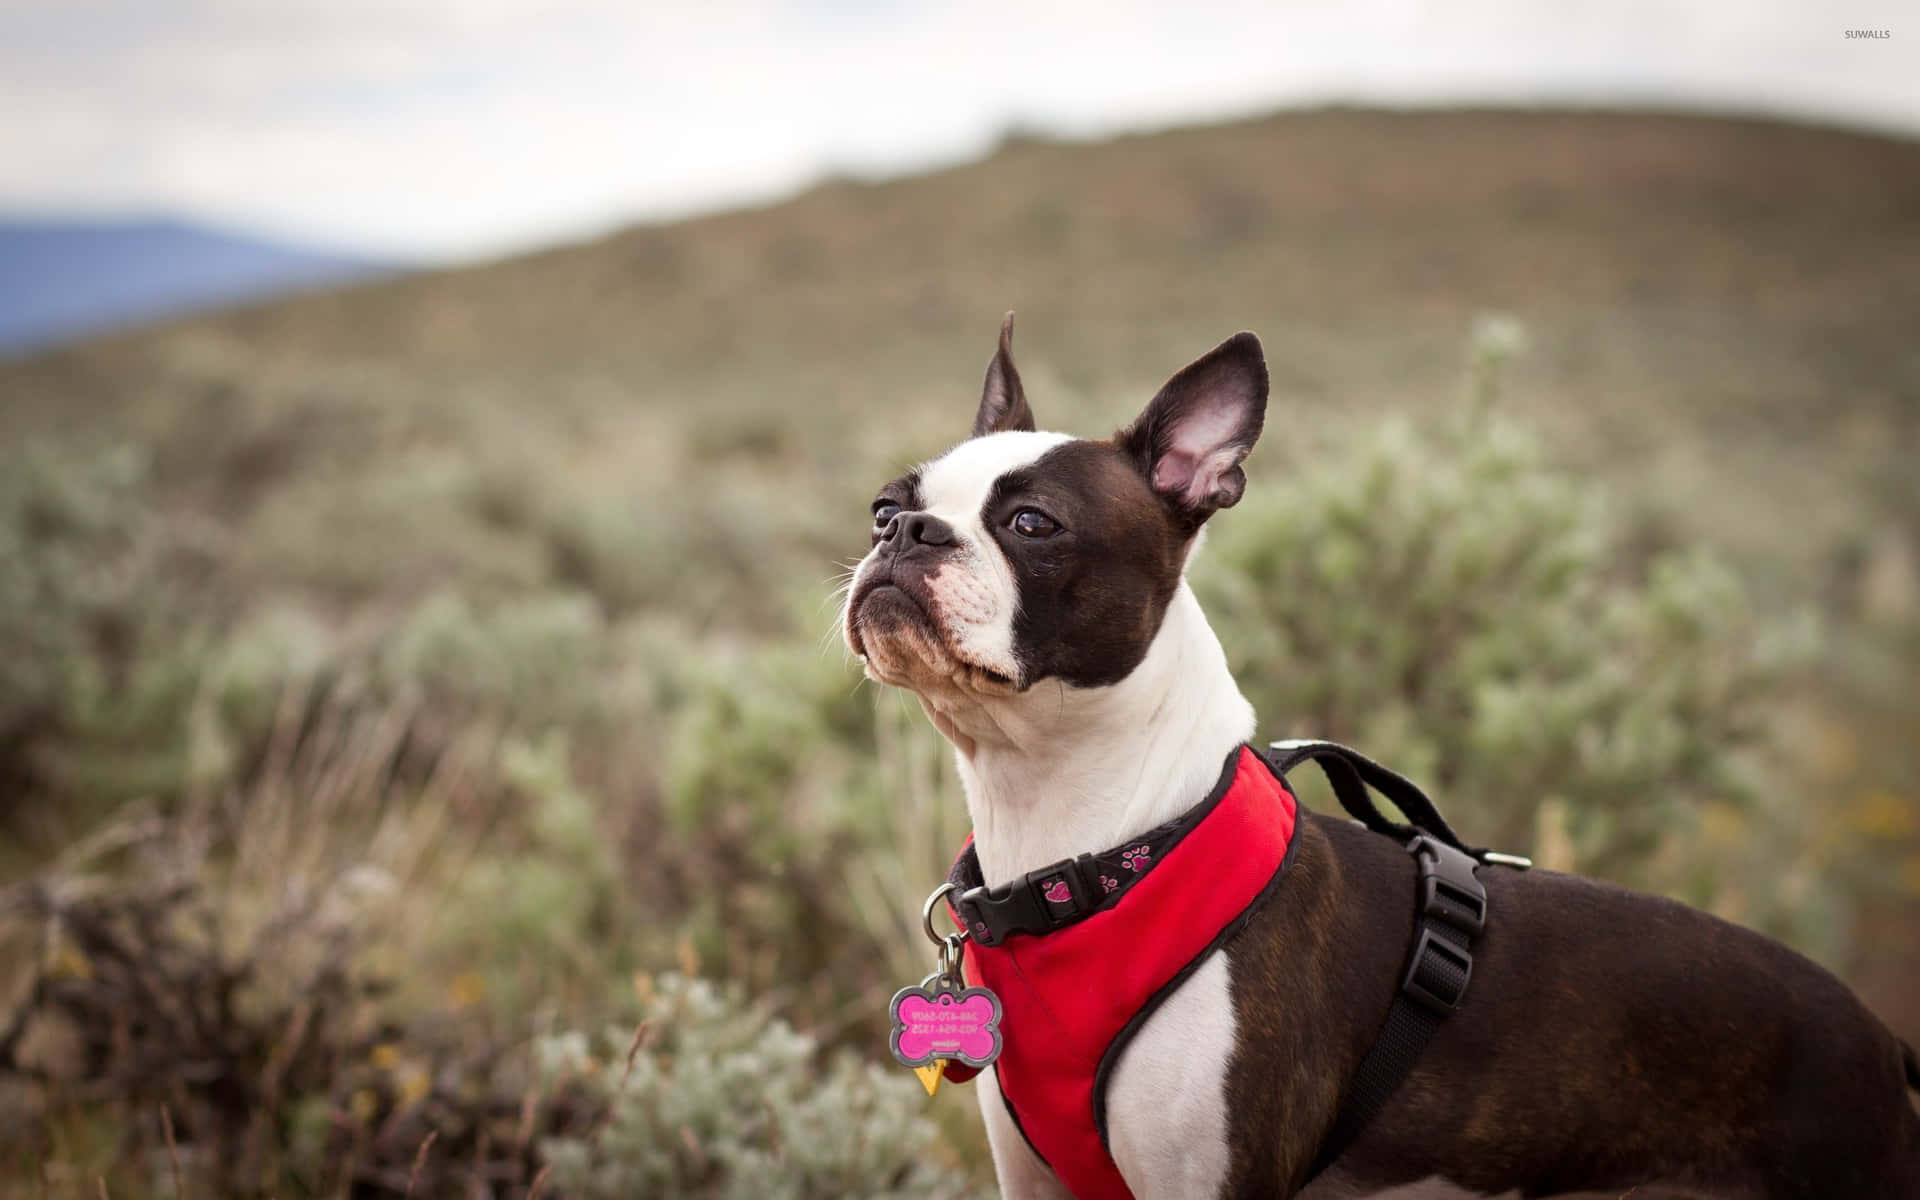 This adorable French Bulldog is ready for its close up!